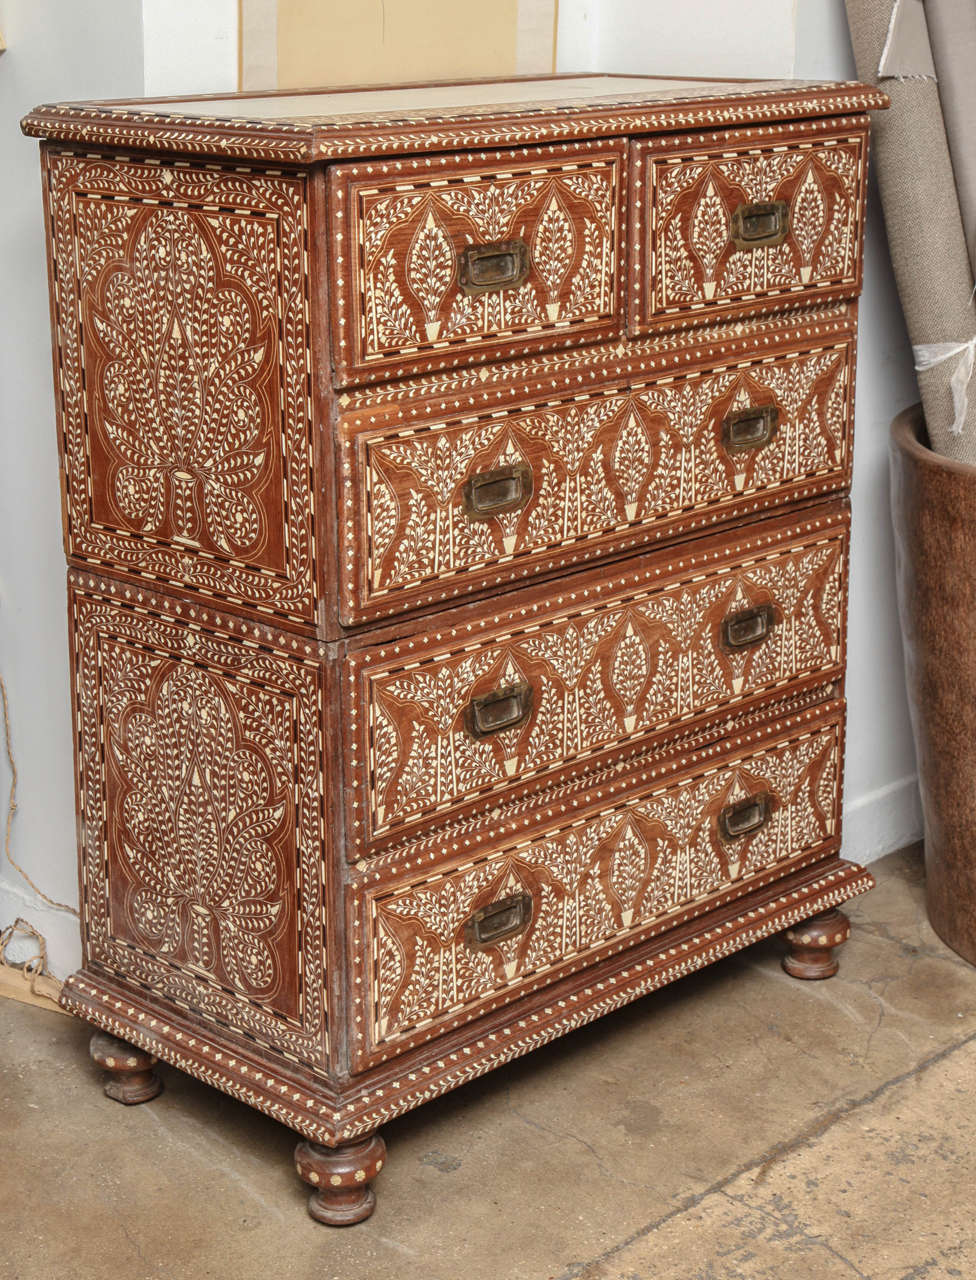 A tall chest of drawers with bone inlay in a Classic pattern, from India. Five drawers with brass pulls. Two sections, bun and post feet, marble inset top.